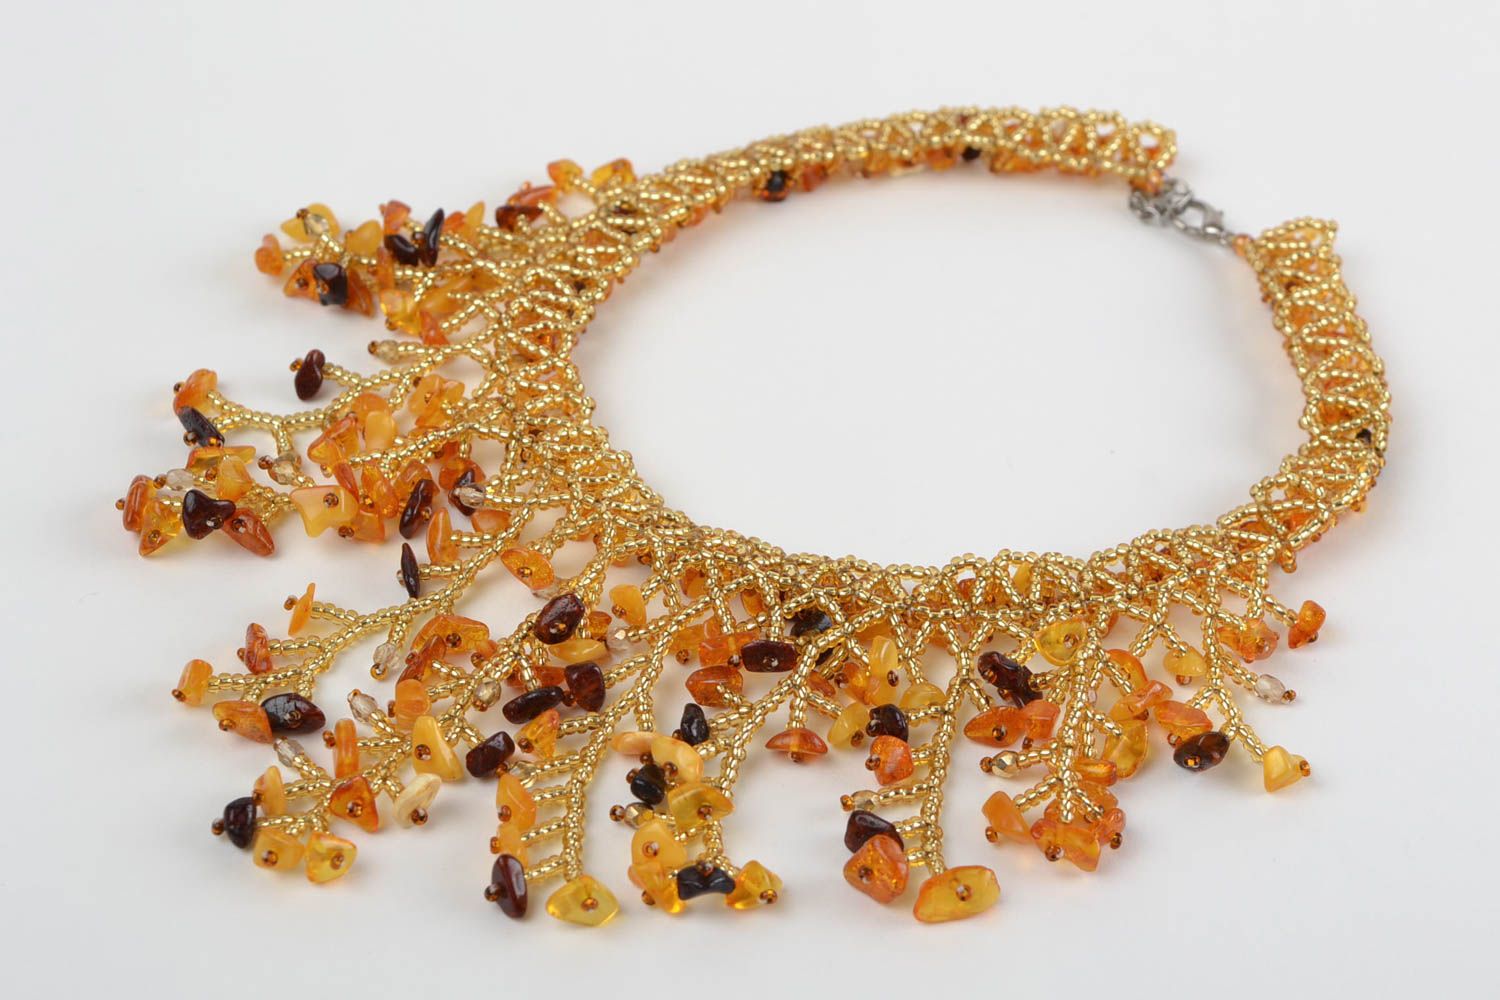 Handmade beaded necklace with natural stones designer fancy accessory photo 5